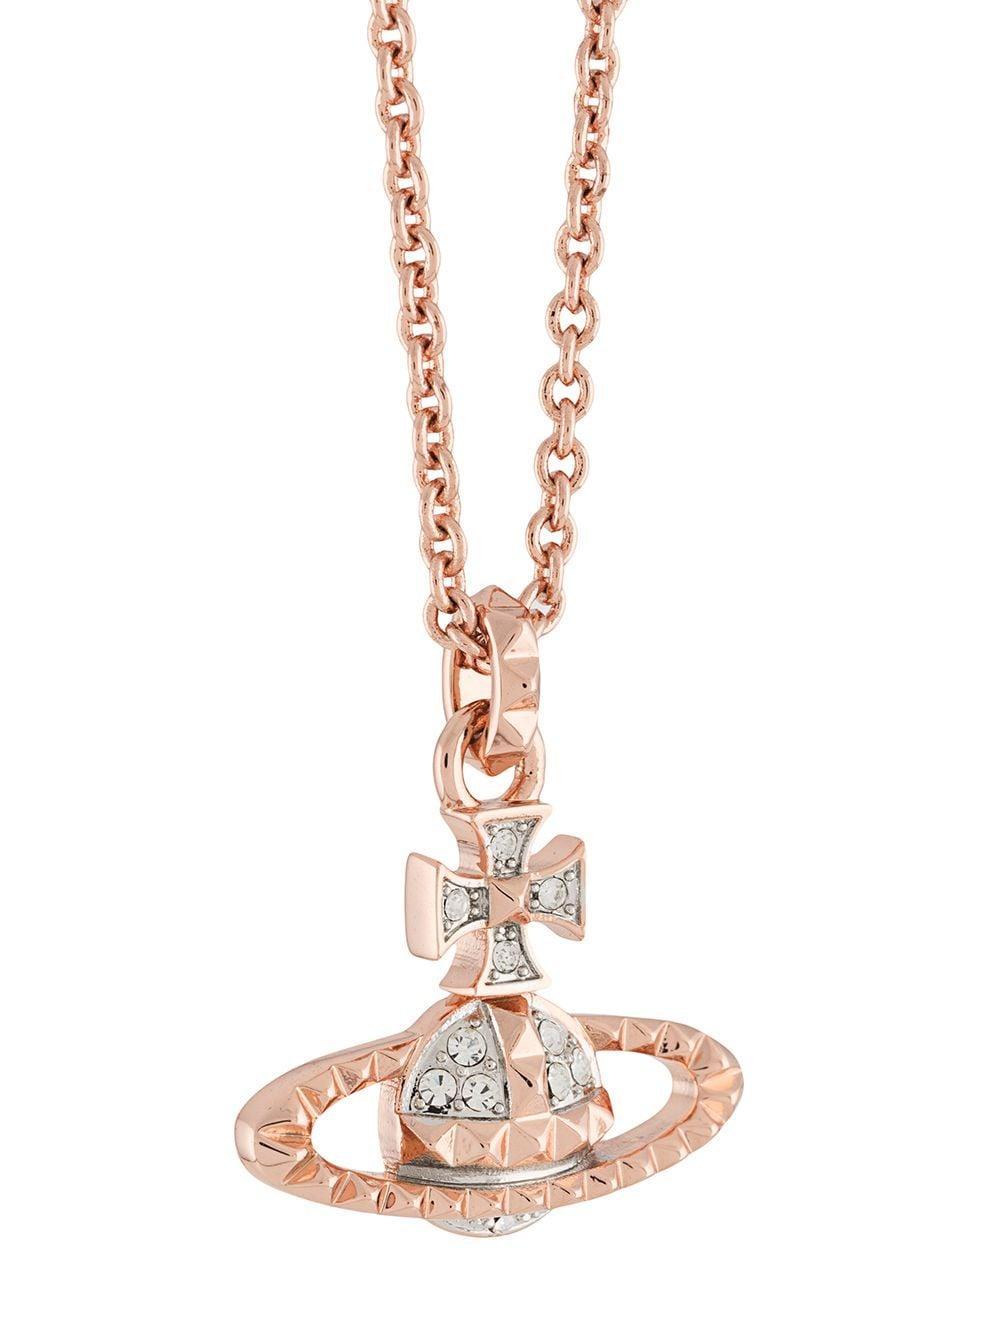 Vivienne Westwood Mayfair Bas Relief Pendant Necklace in Pink - Lyst